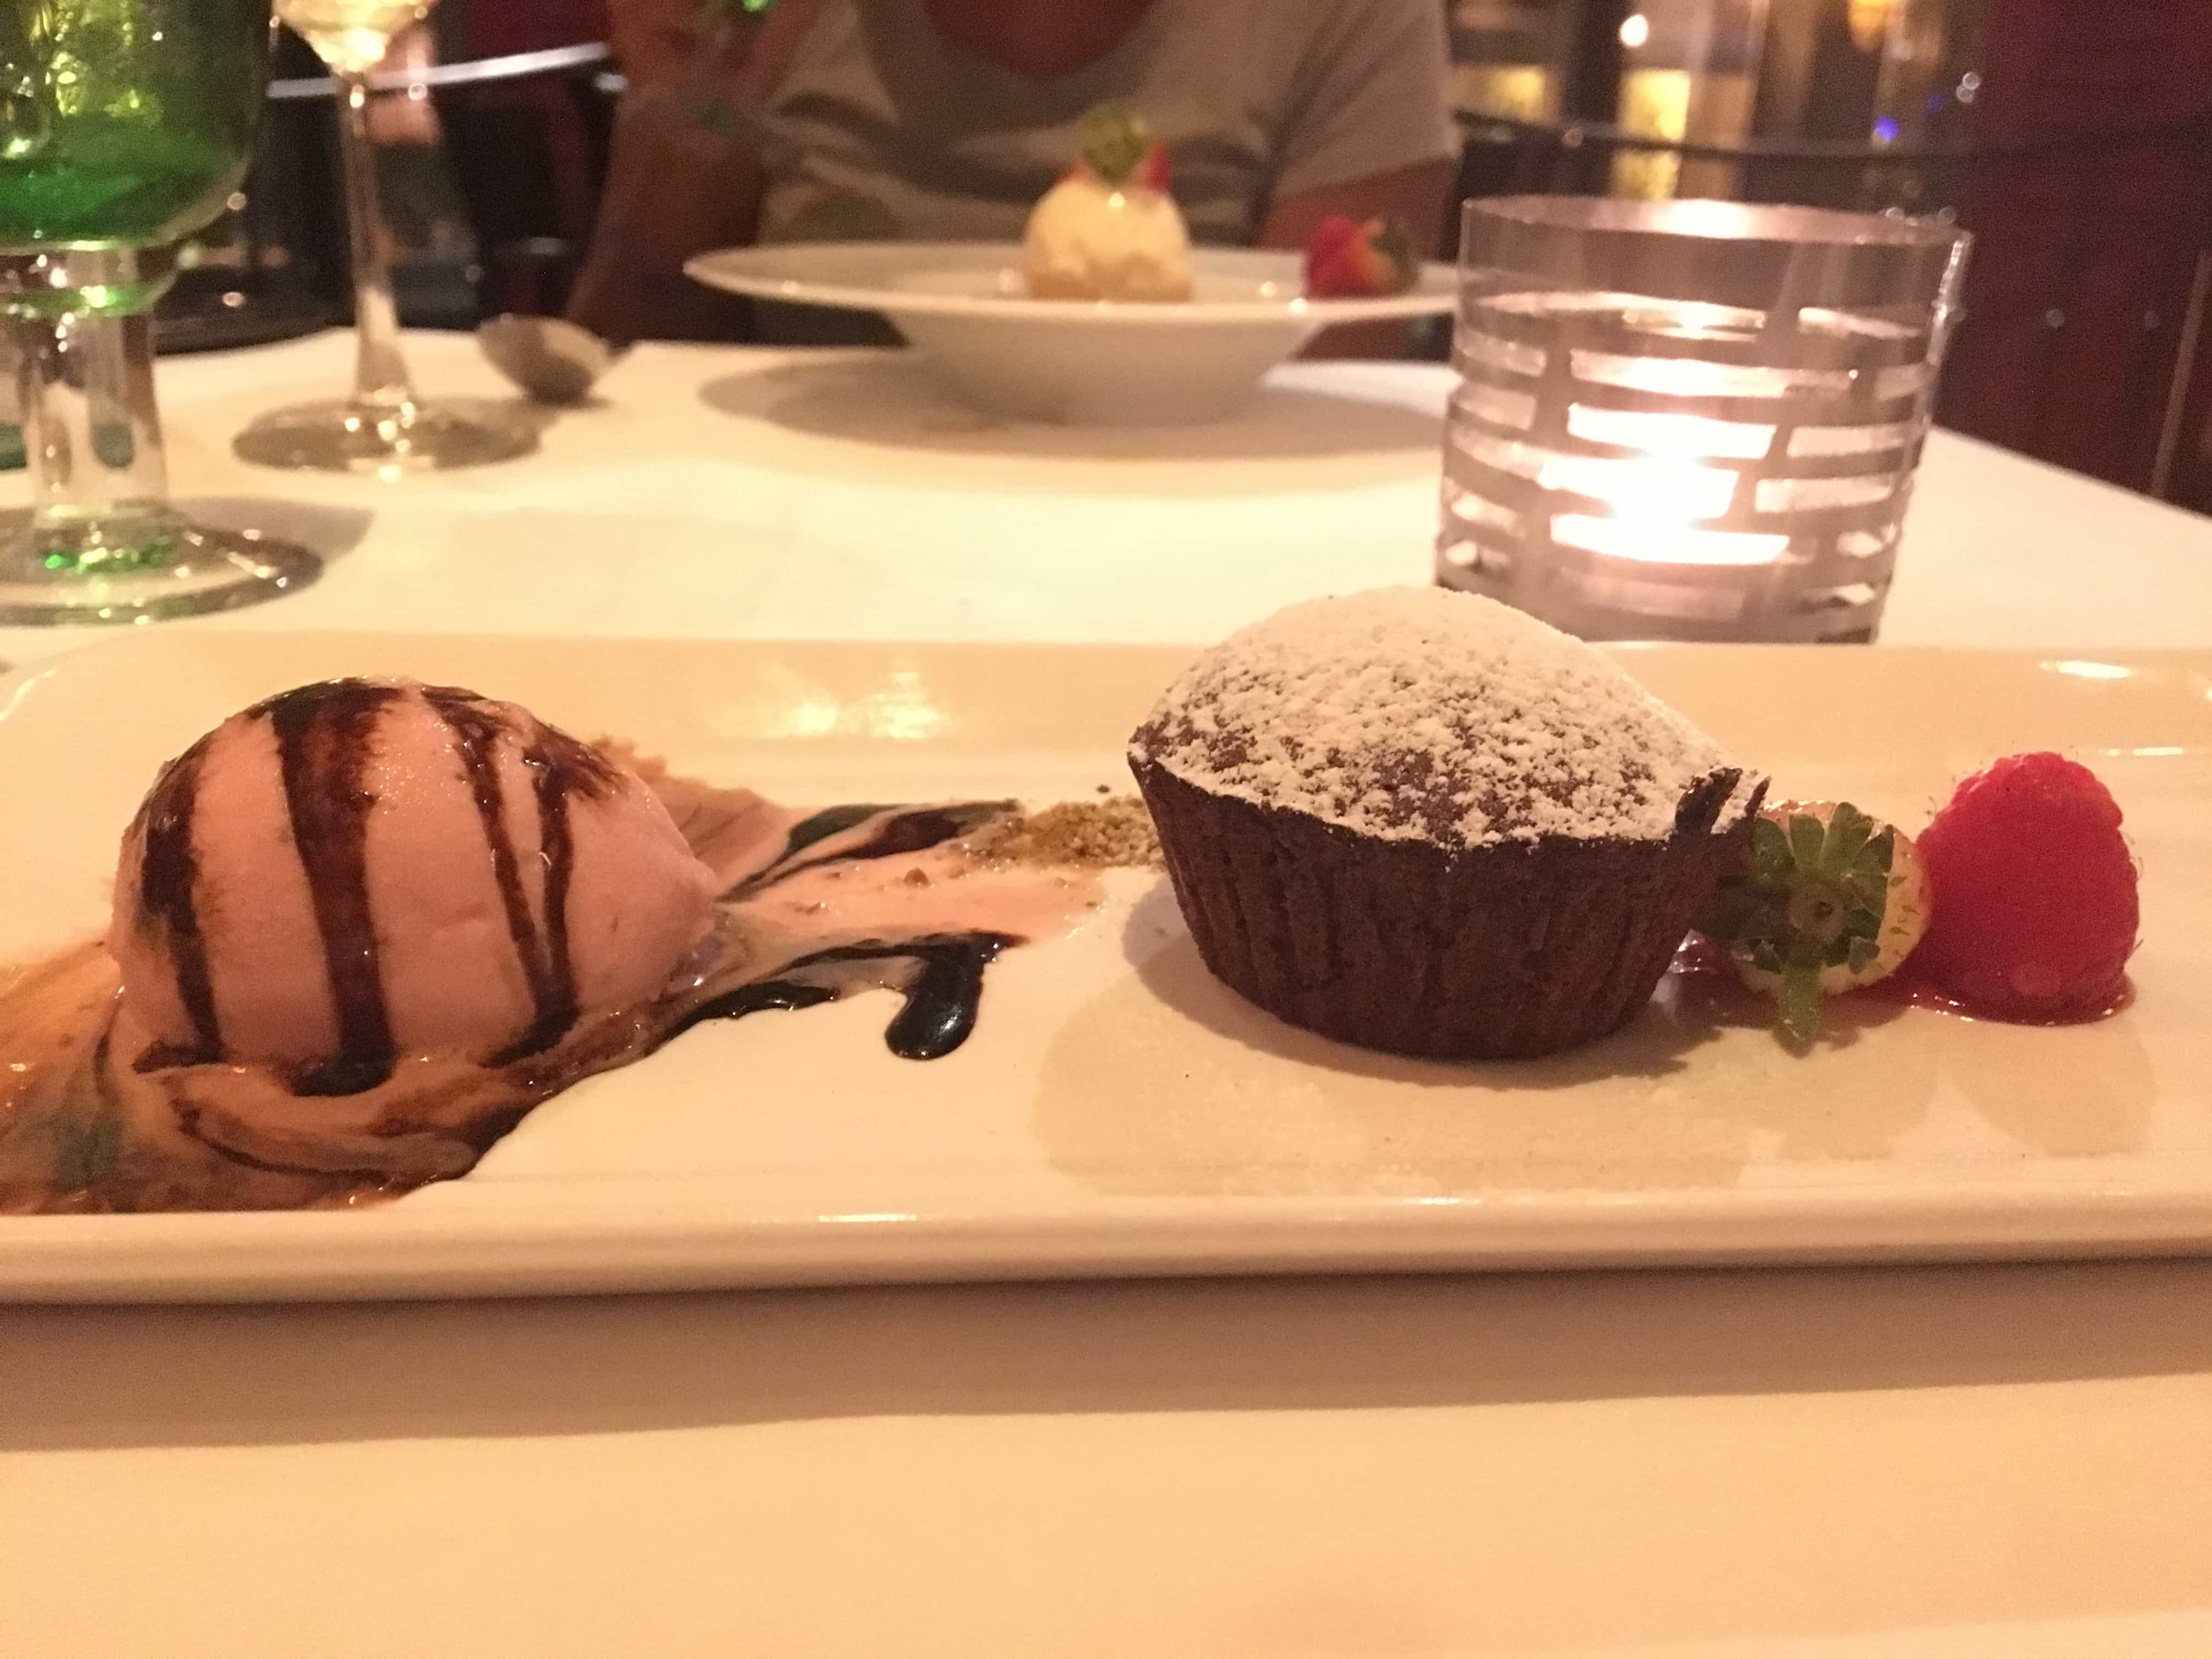 Muffin and ice-cream, great desserts in the Kuala Lumpur experience